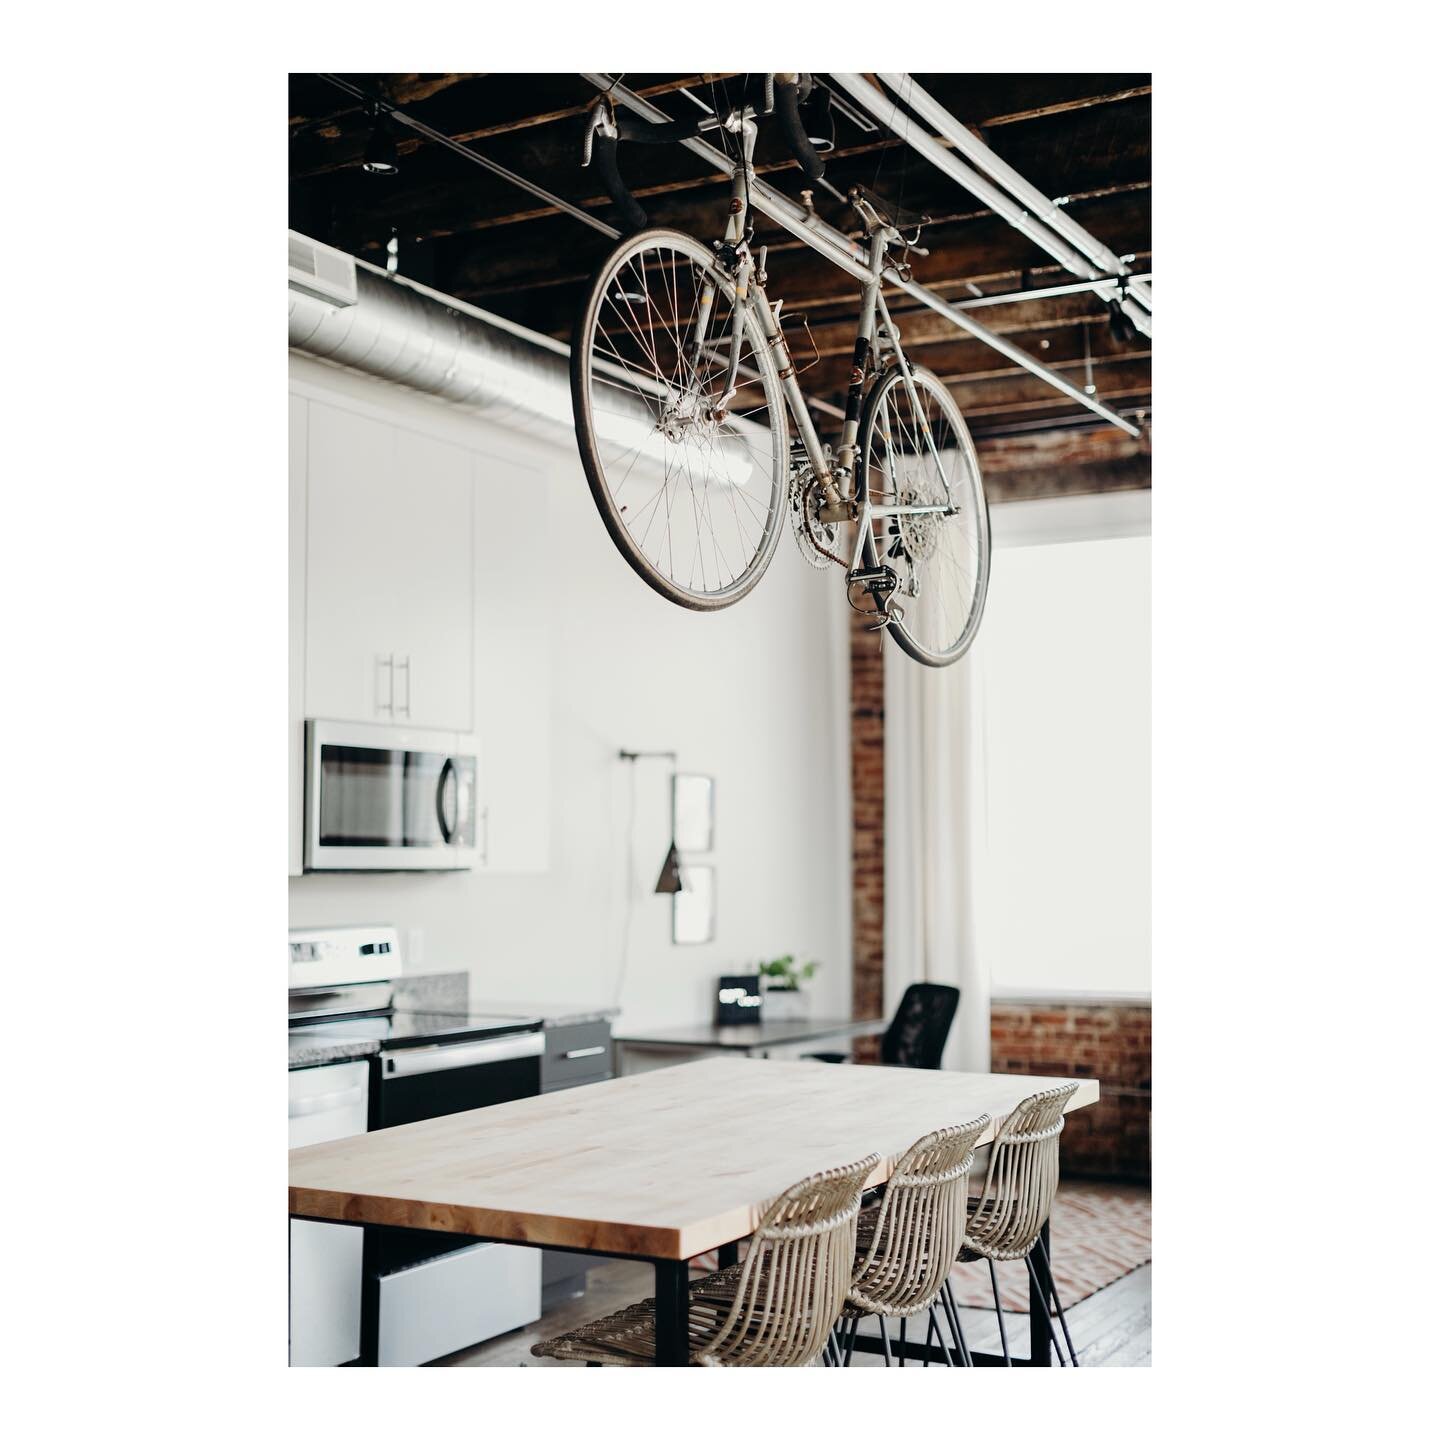 Why, yes...that is a vintage bicycle hanging above our custom built island! You wanna know why?? This is a glimpse into The Peloton Suite, which is our curated cycling loft. All four of our lofts have a different outdoor/adventure theme and since thi